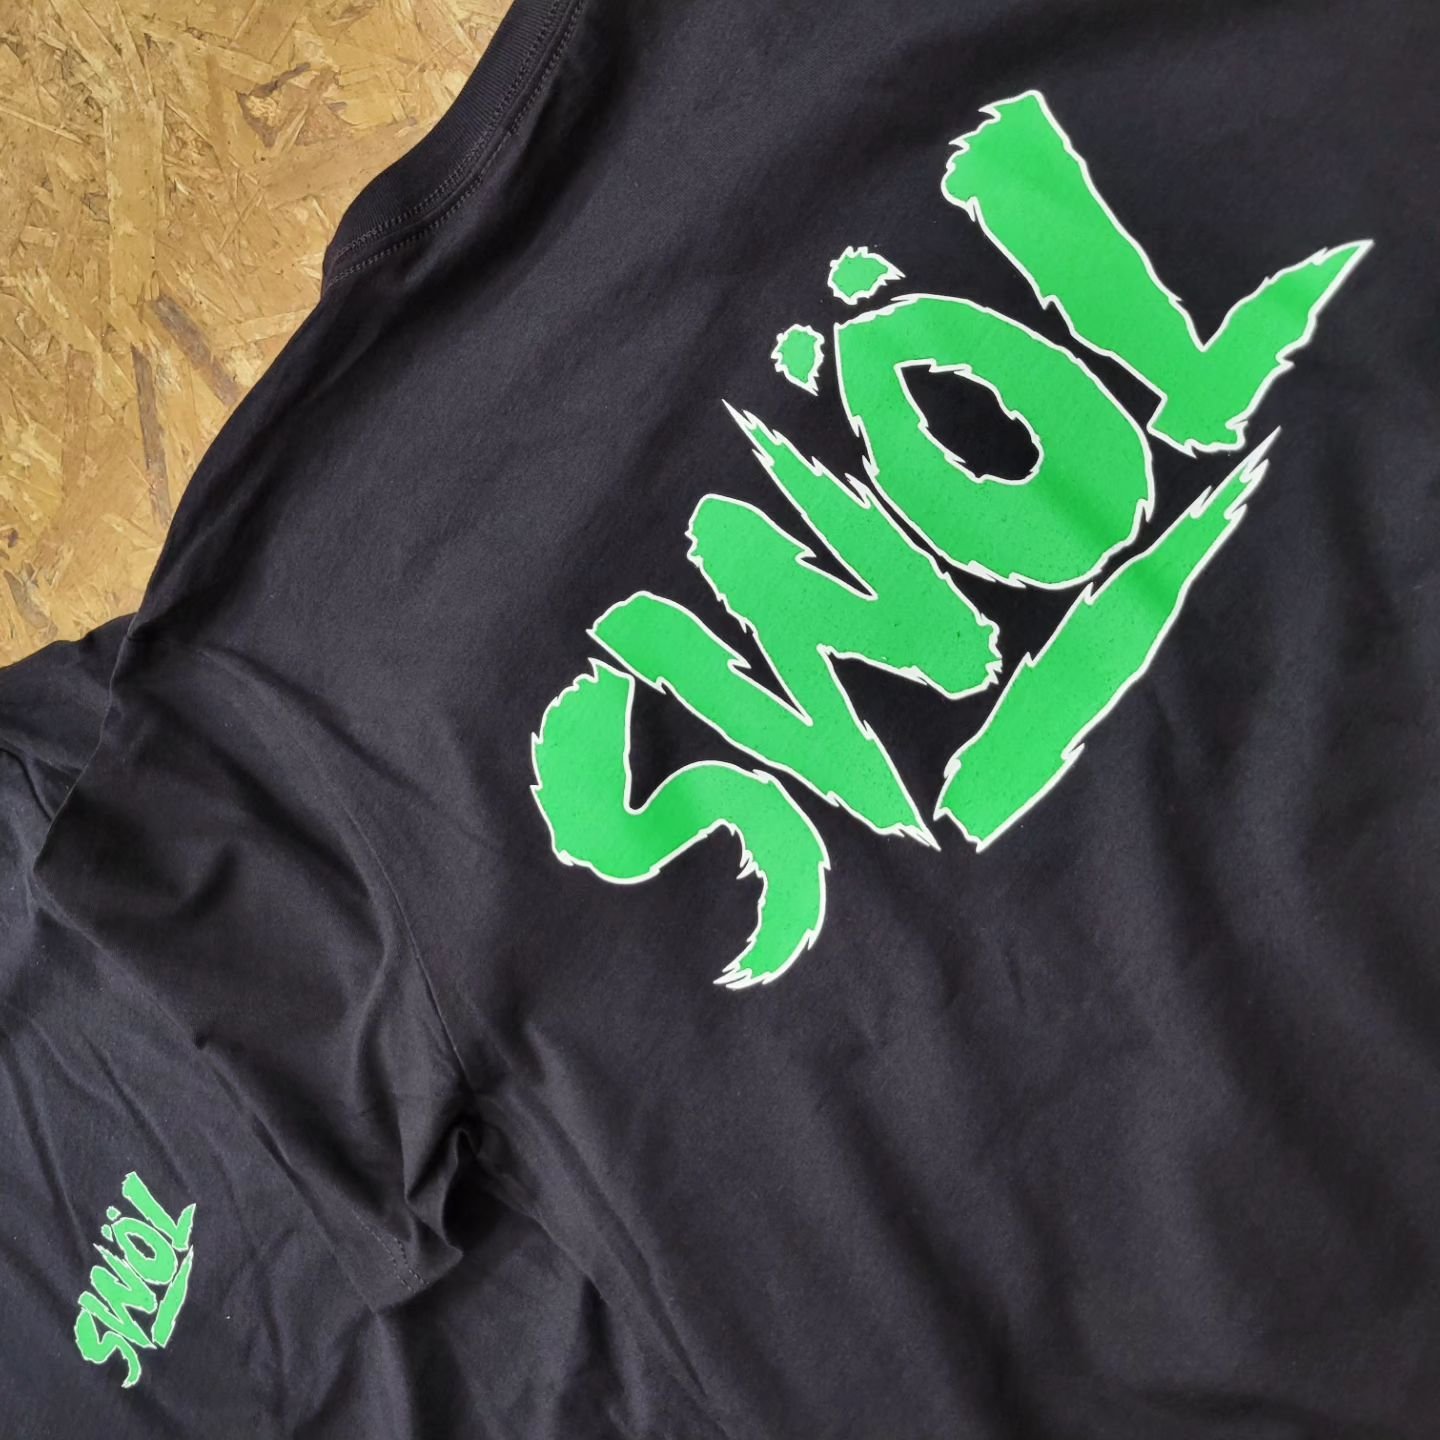 Shirts for @_.swol._ Turned out great with a vibrant green!